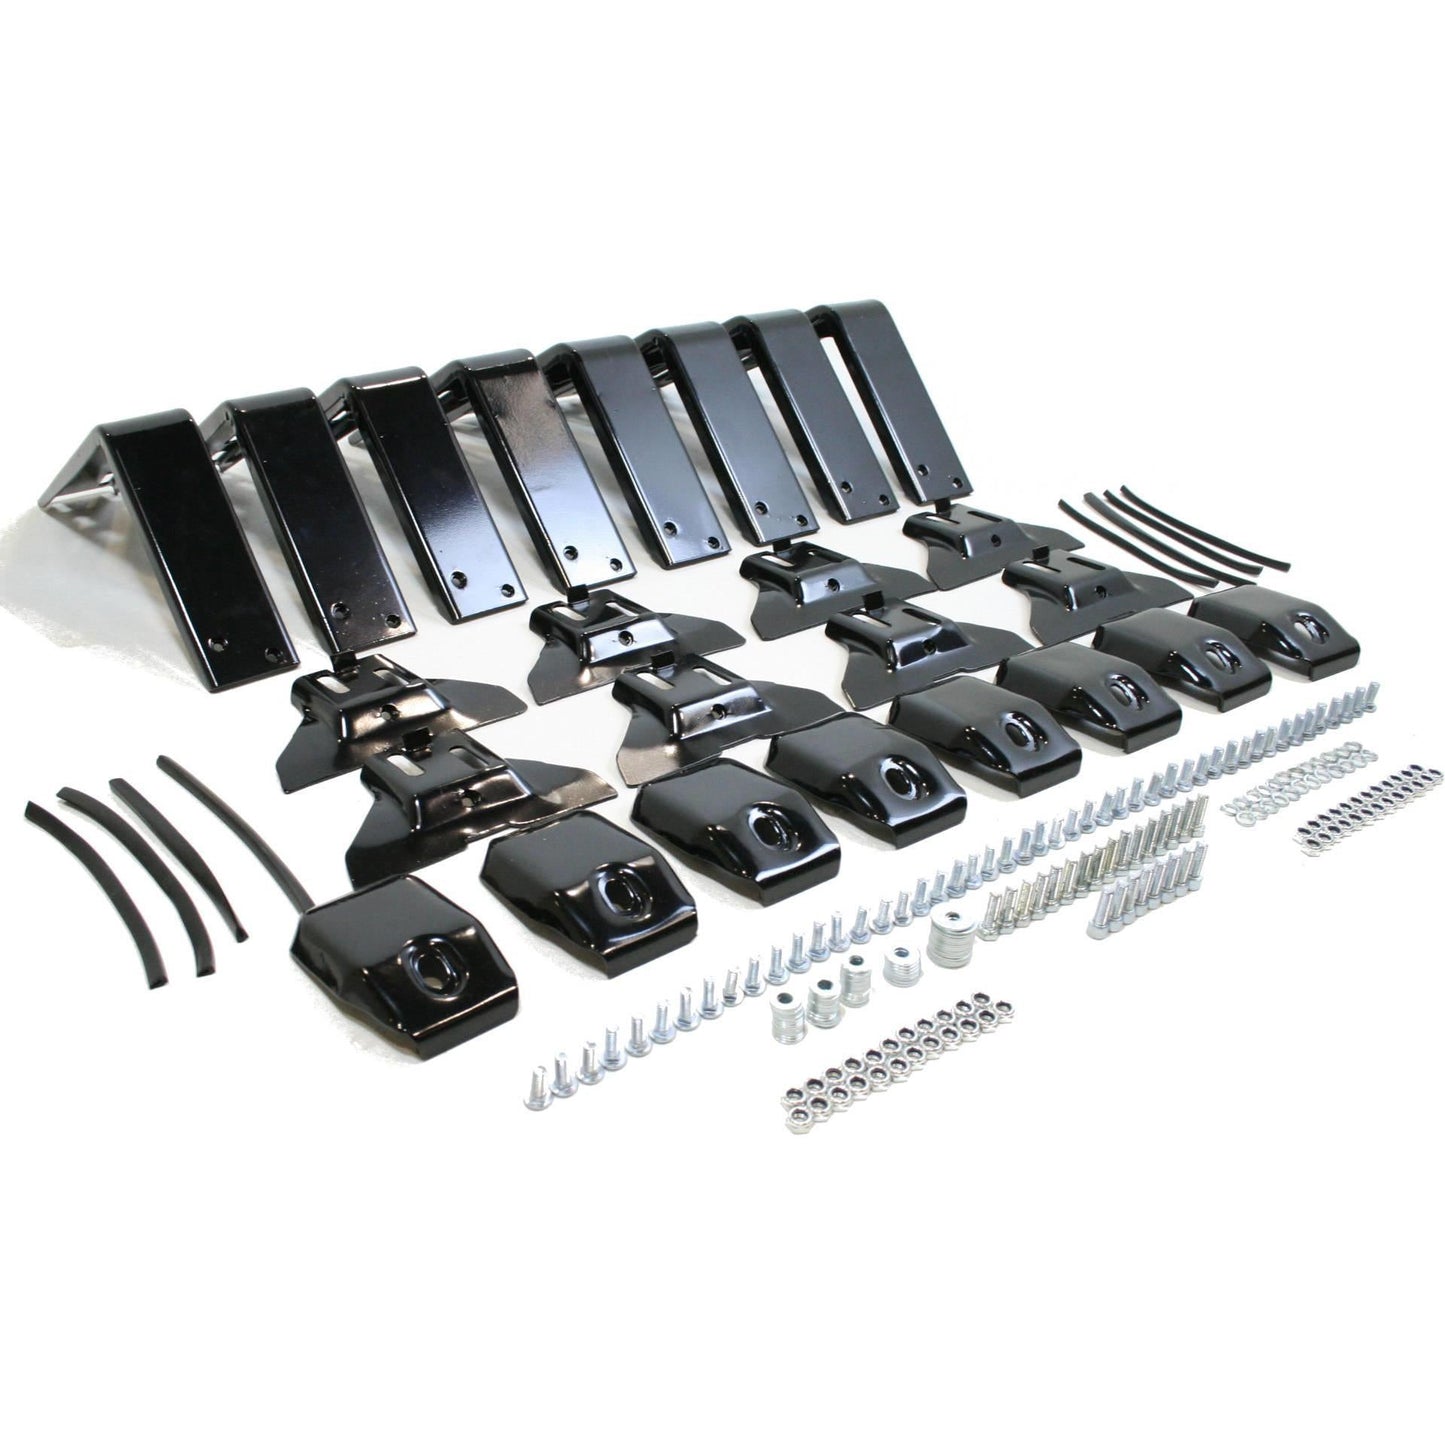 Replacement 9-inch Brackets for Direct4x4 Expedition Roof Racks